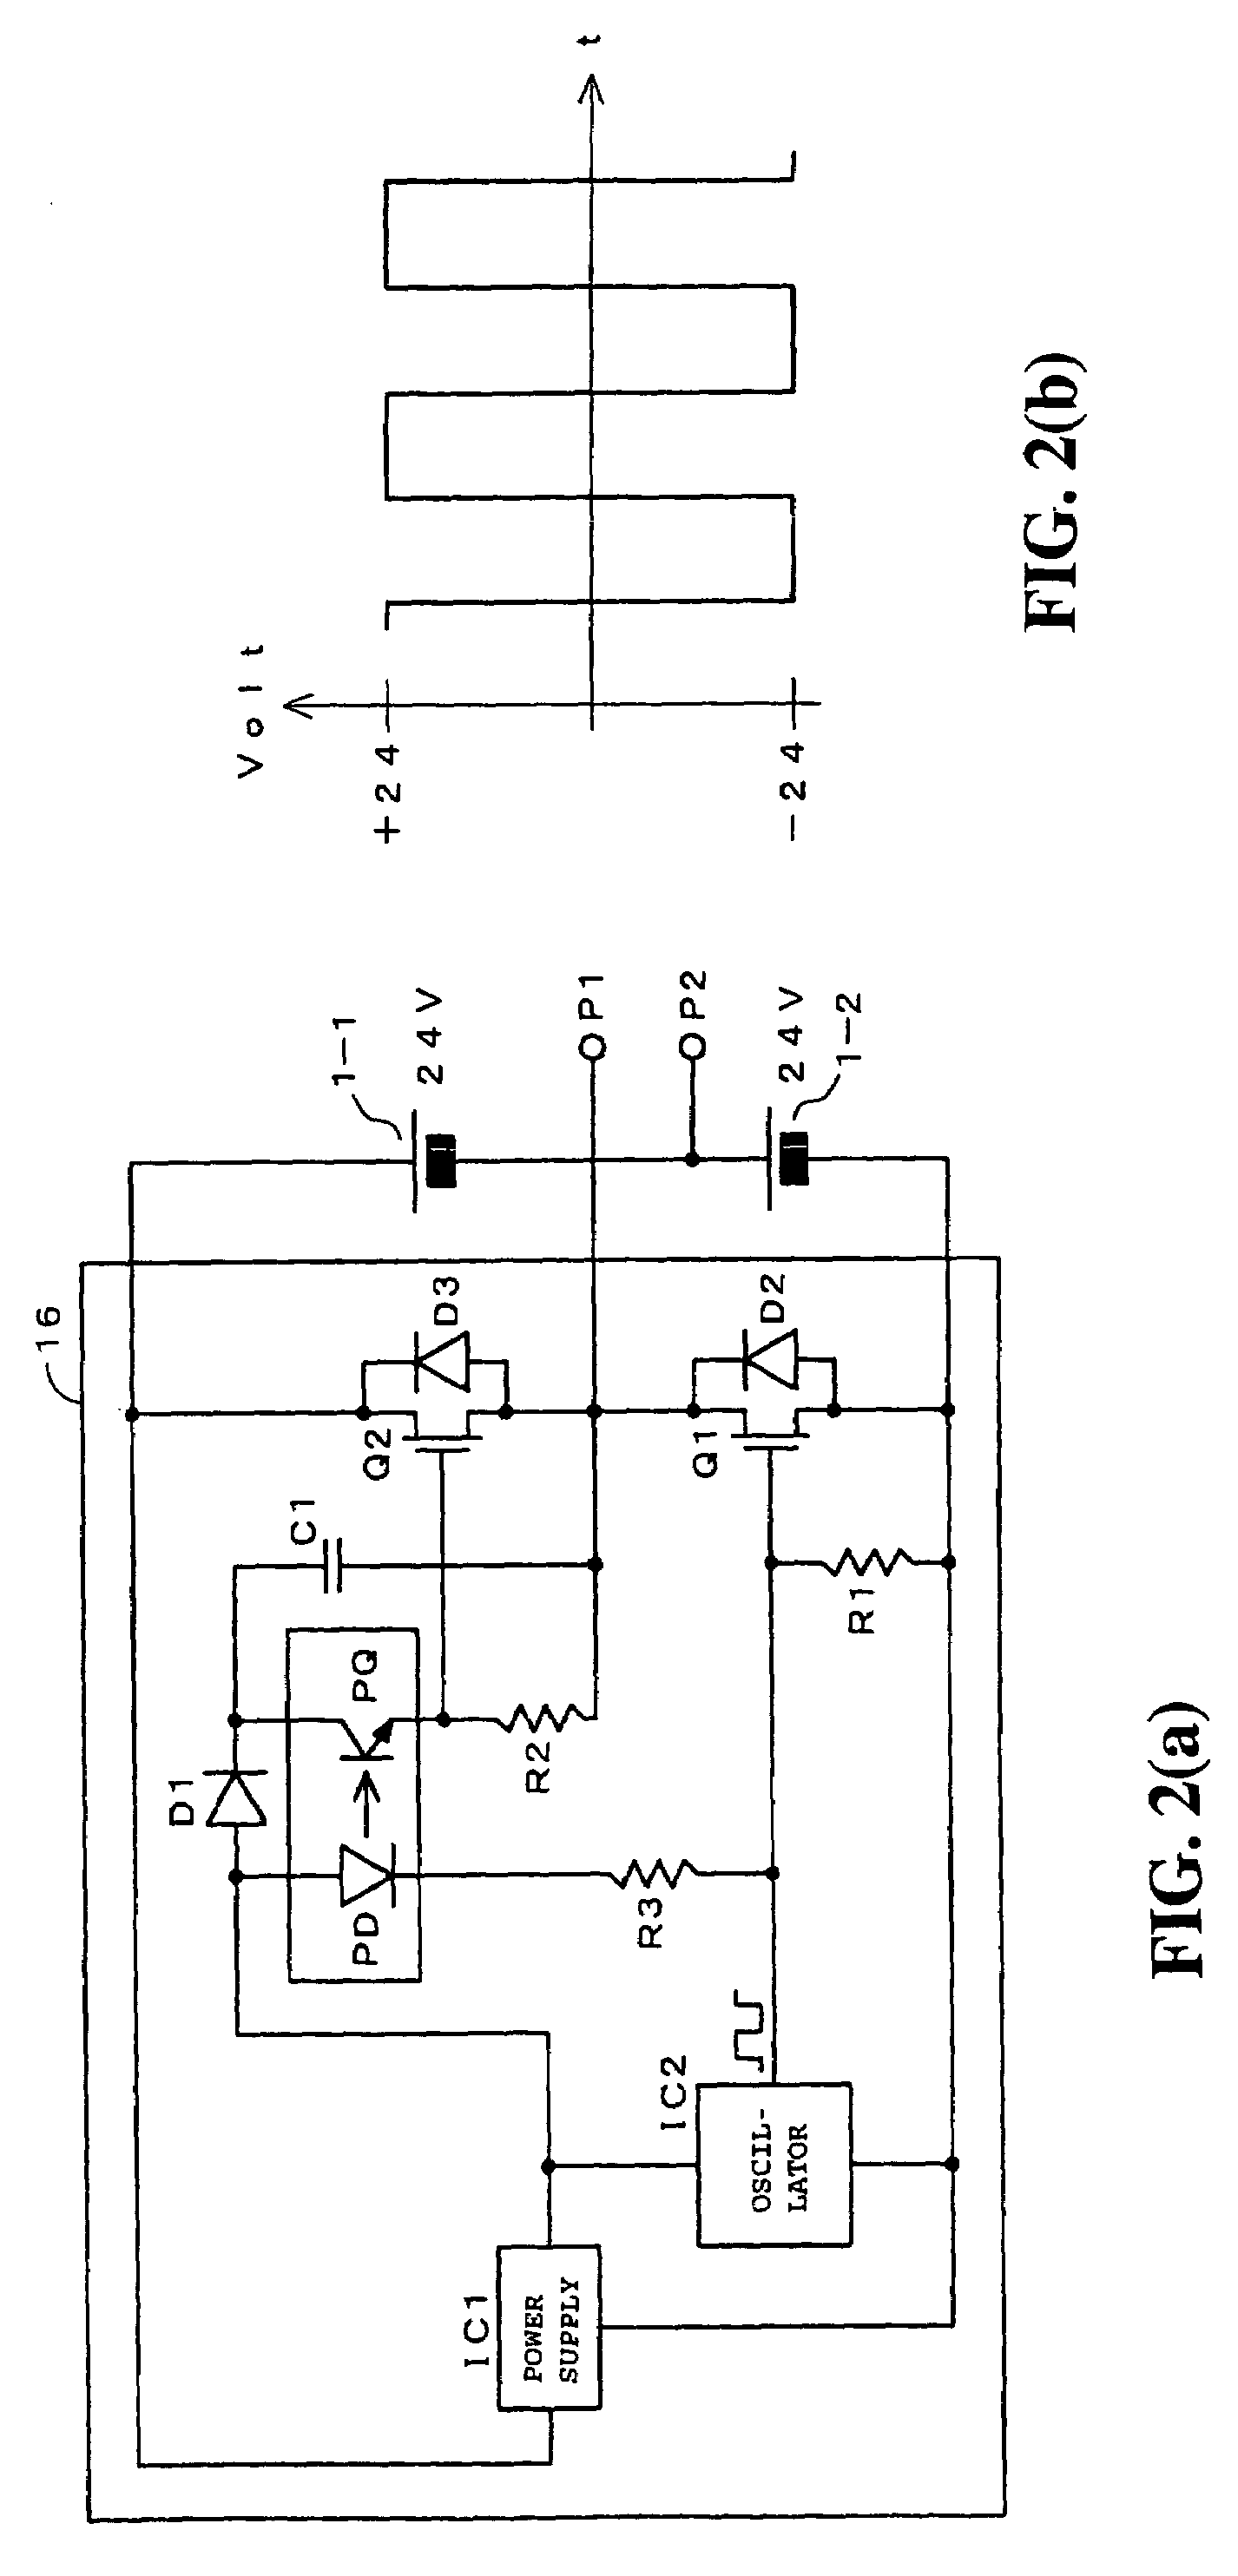 Power supply apparatus for electric vehicle